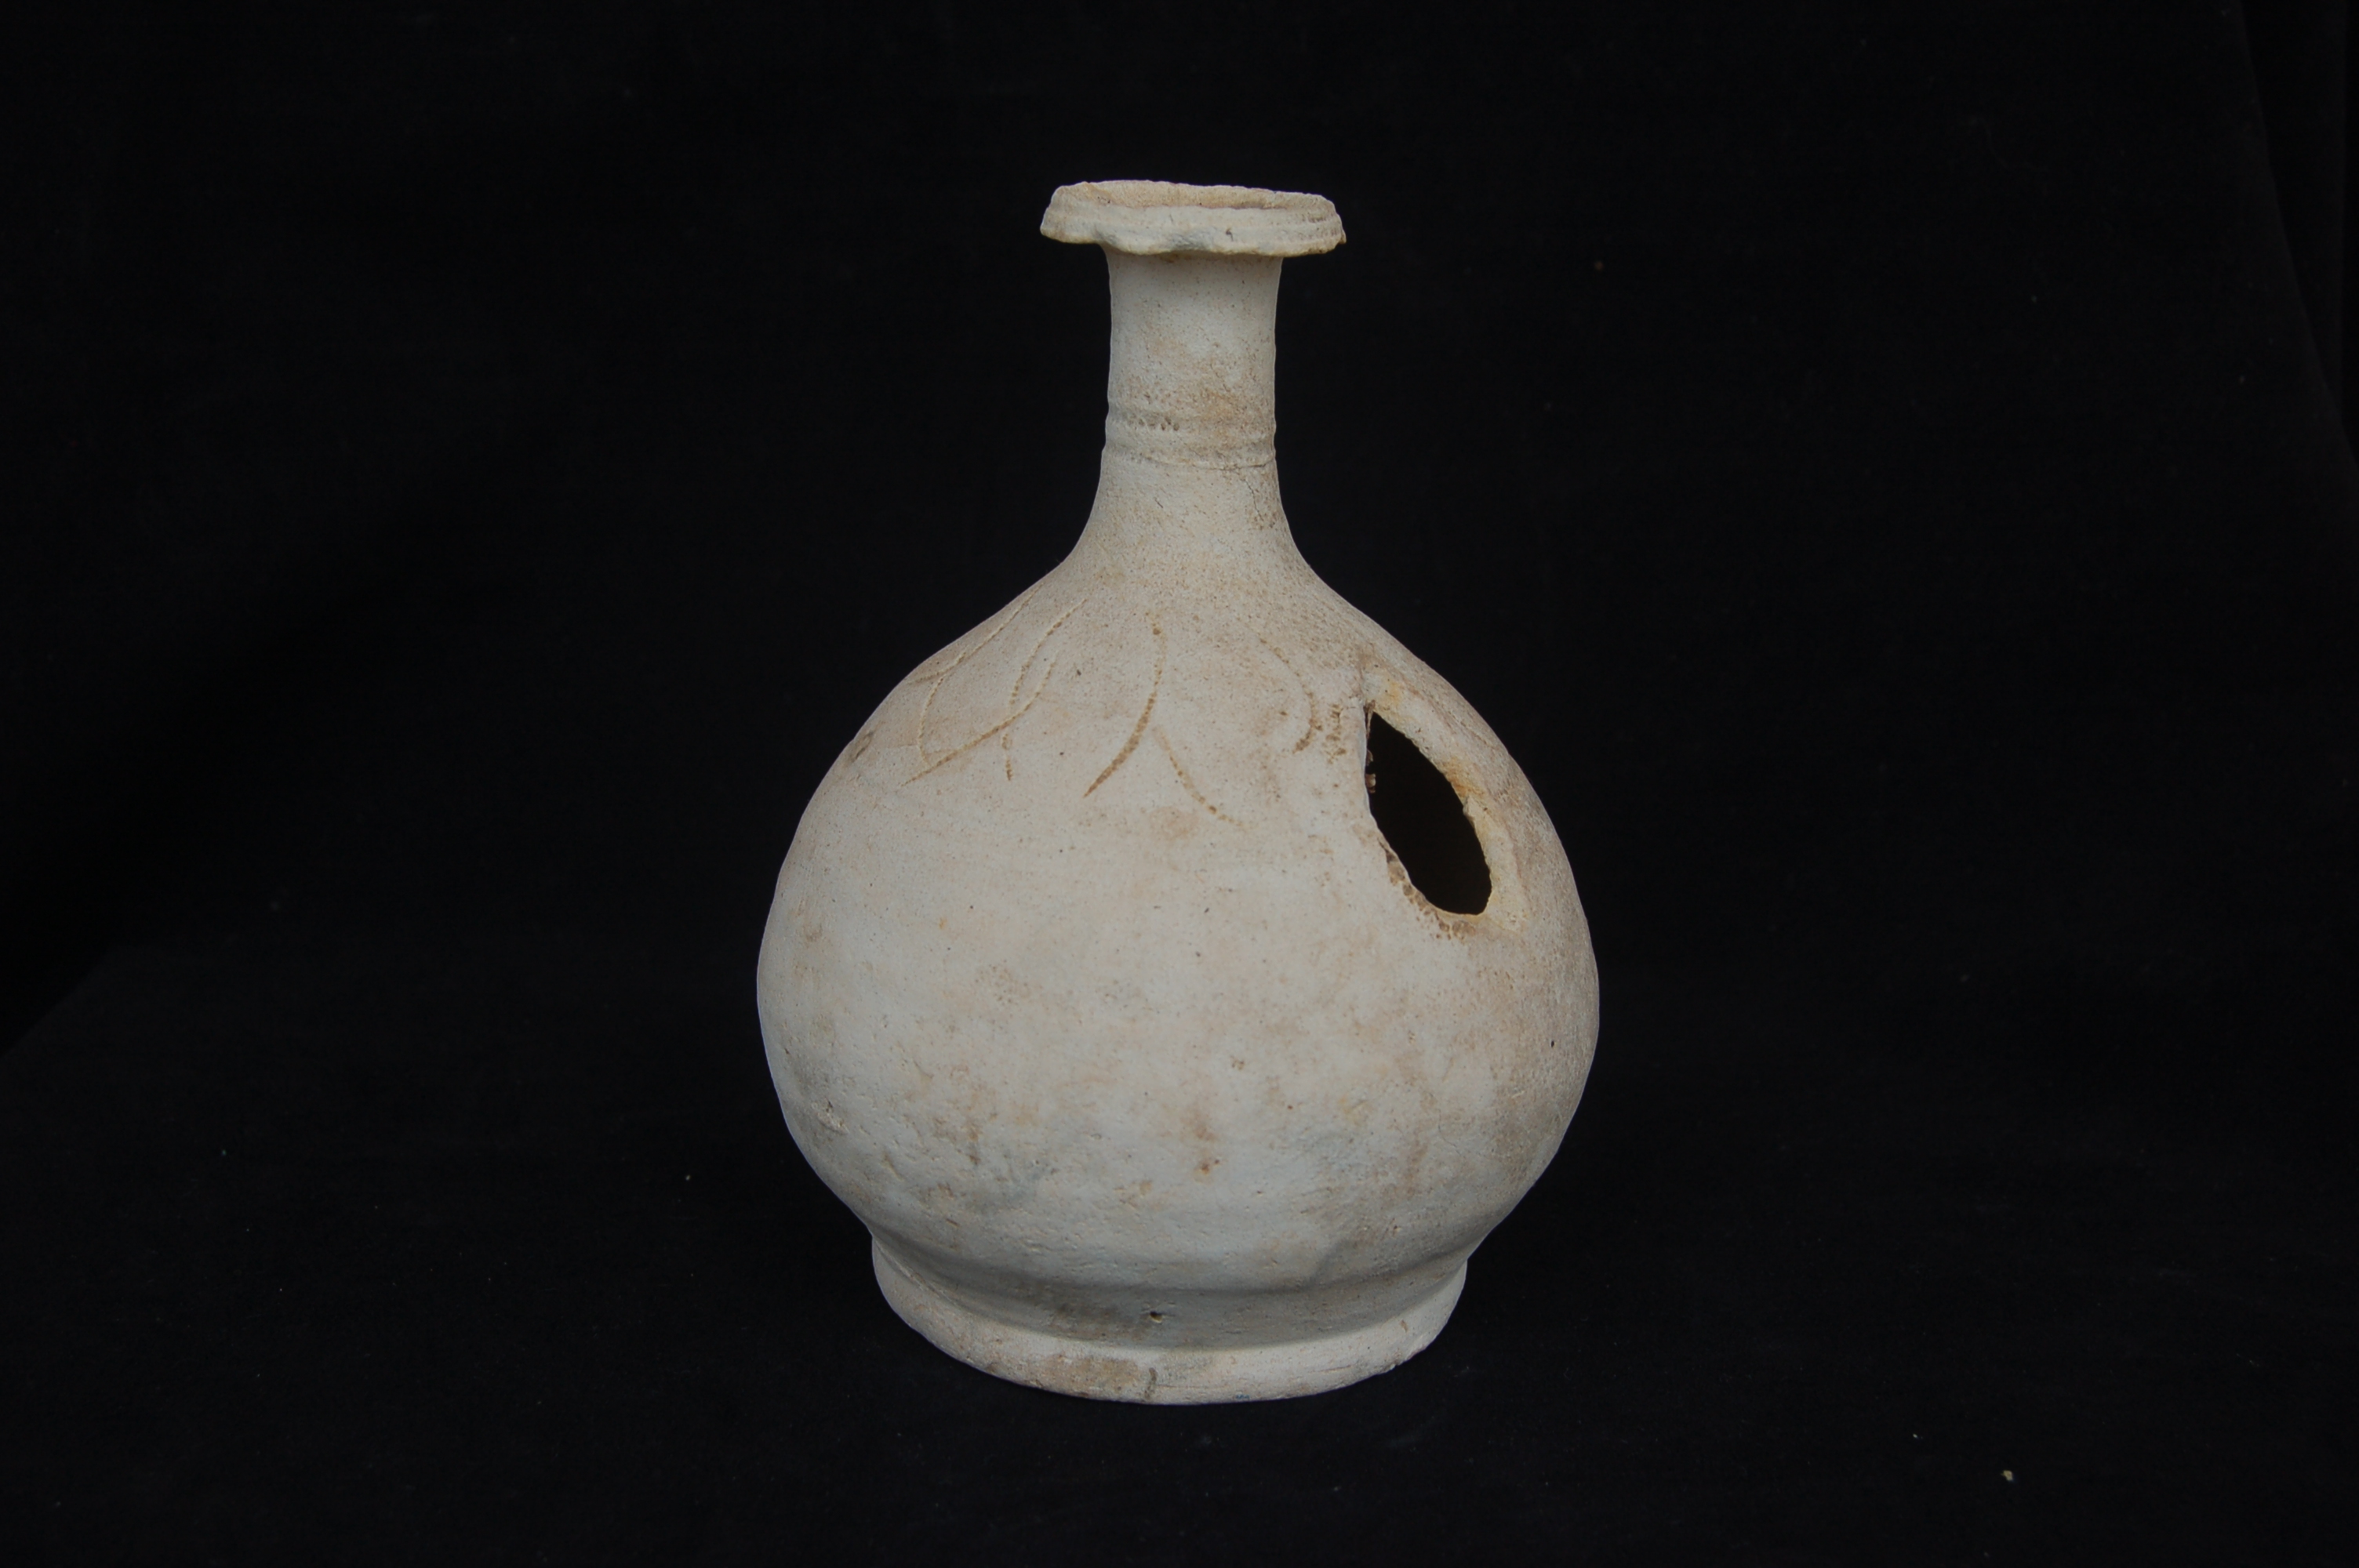 Kendi with globular body decorated with incised lotus leaves around the shoulder. Long straight neck with flattened mouth-rim, and a flat base. Spout missing. Diameter 12 cm, height 17 cm.